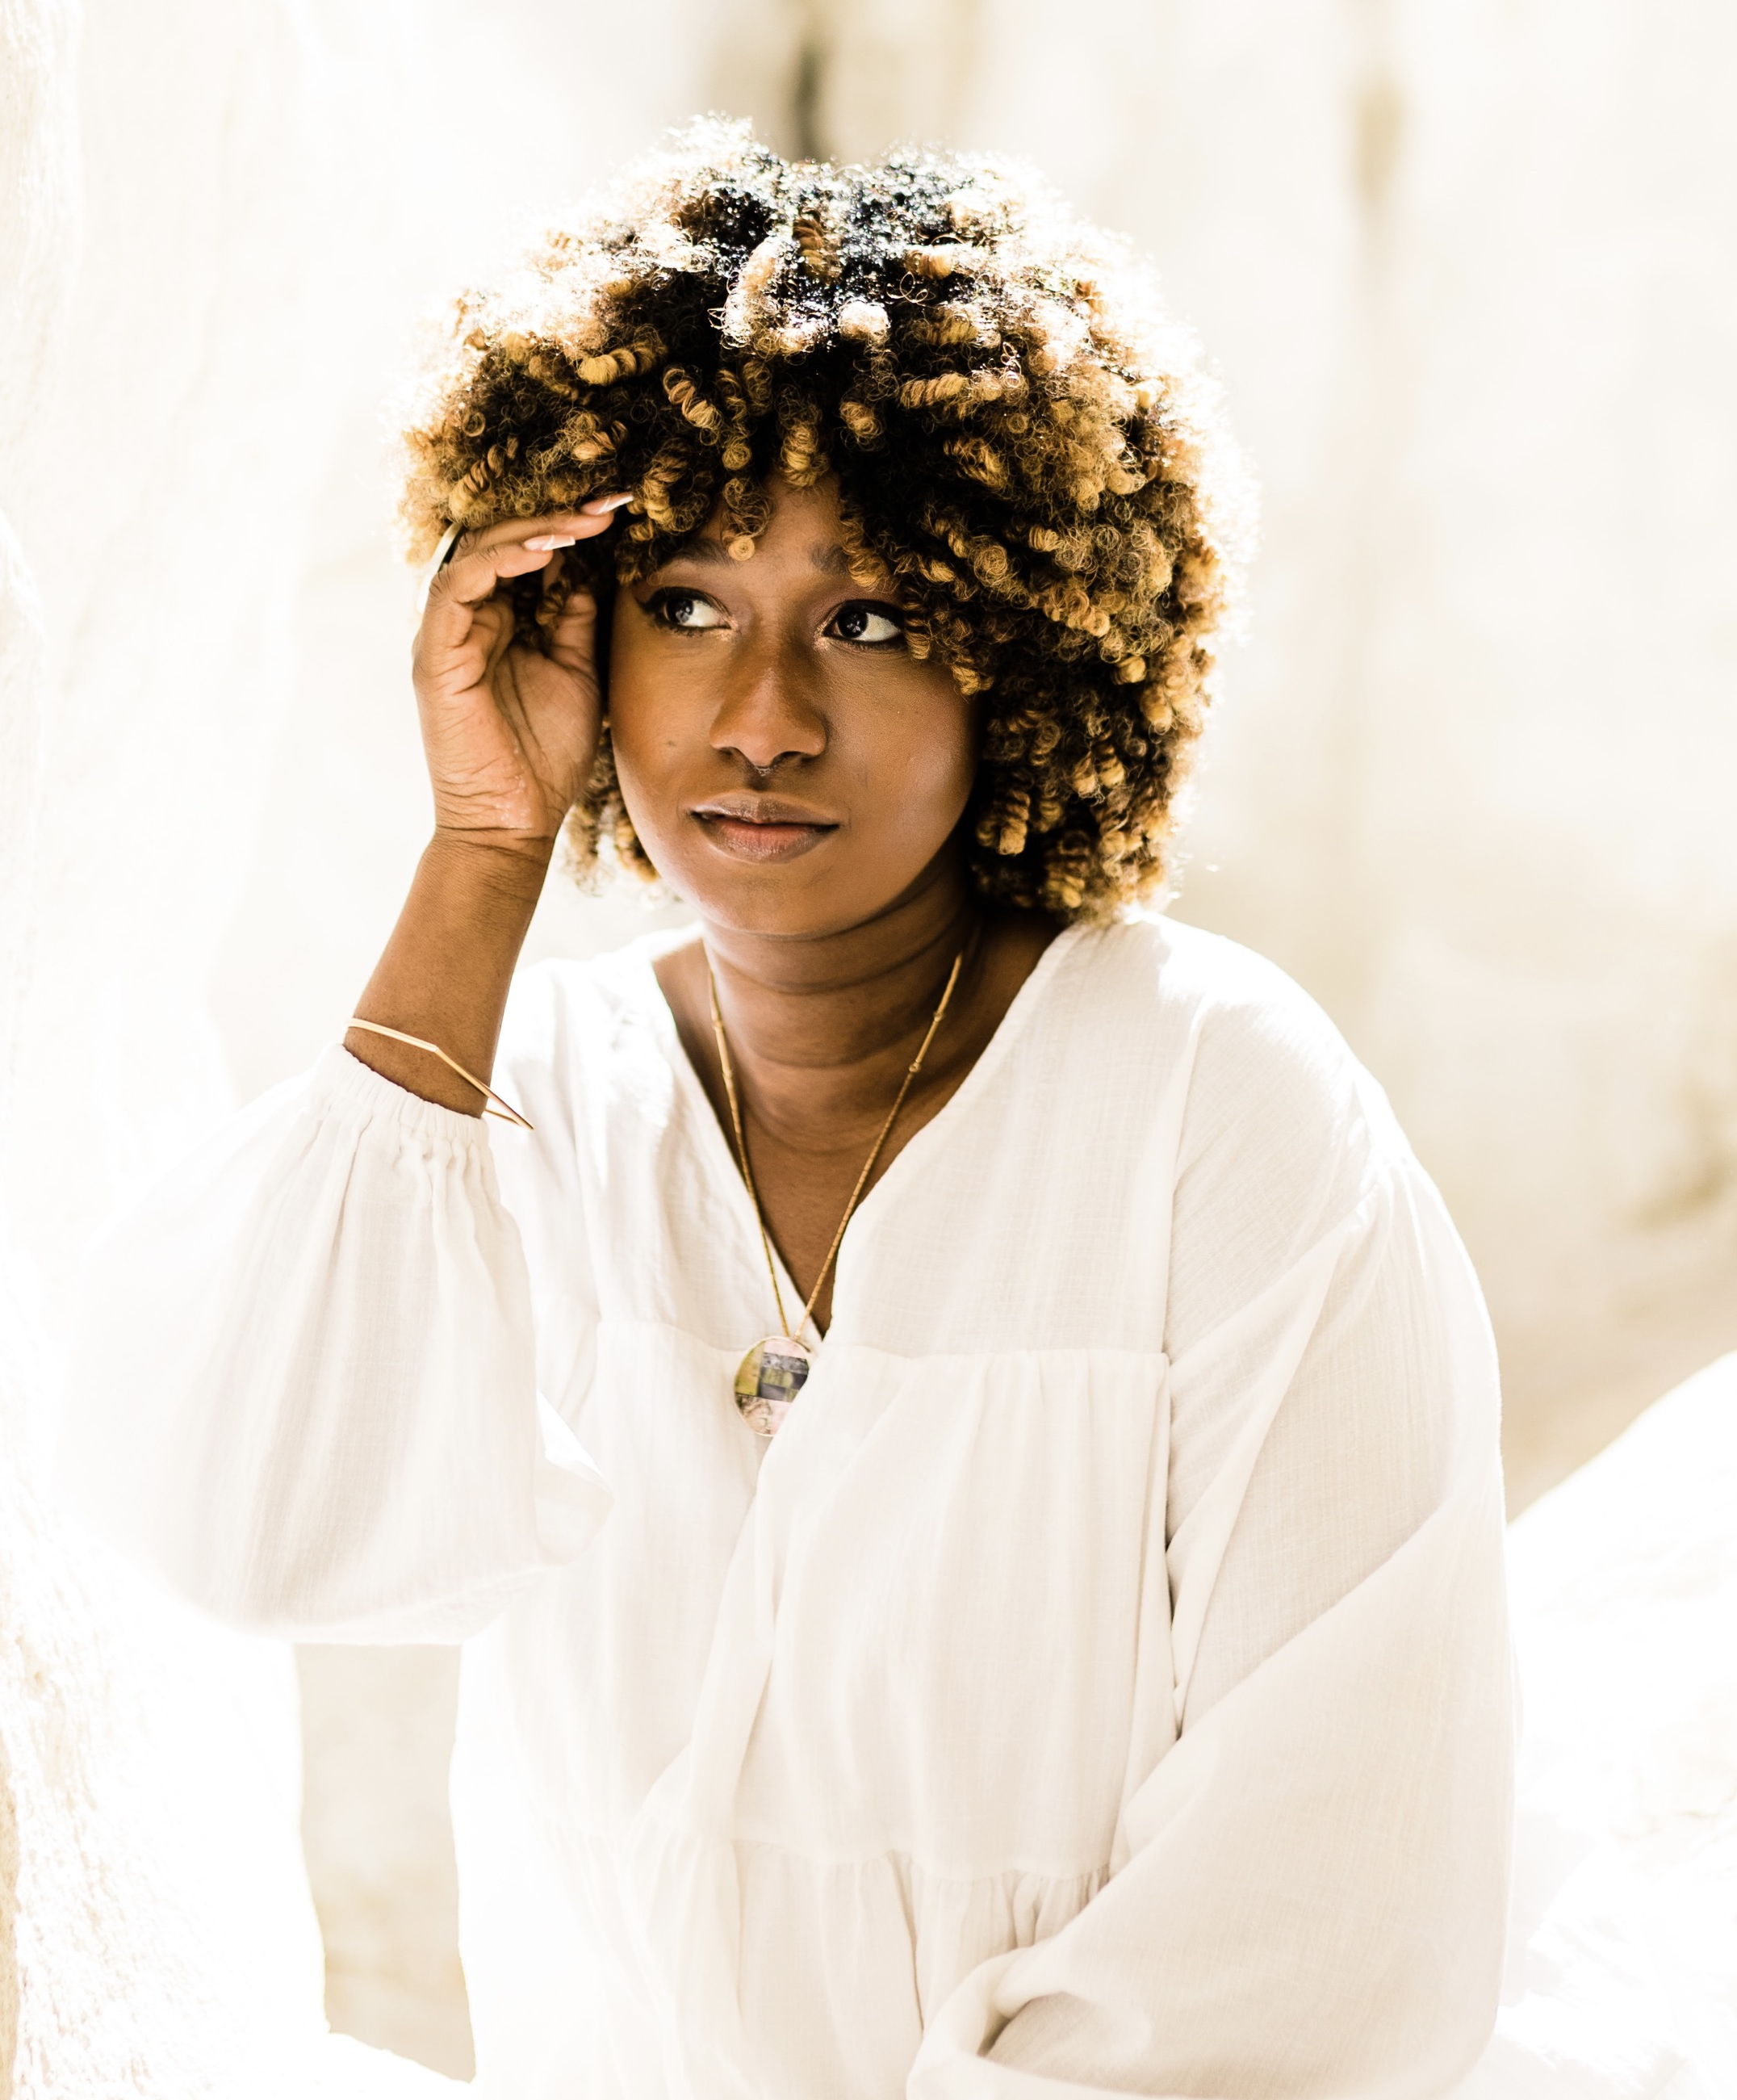 Irina Amouzou, a black femme person,  in a white shirt with a bright background